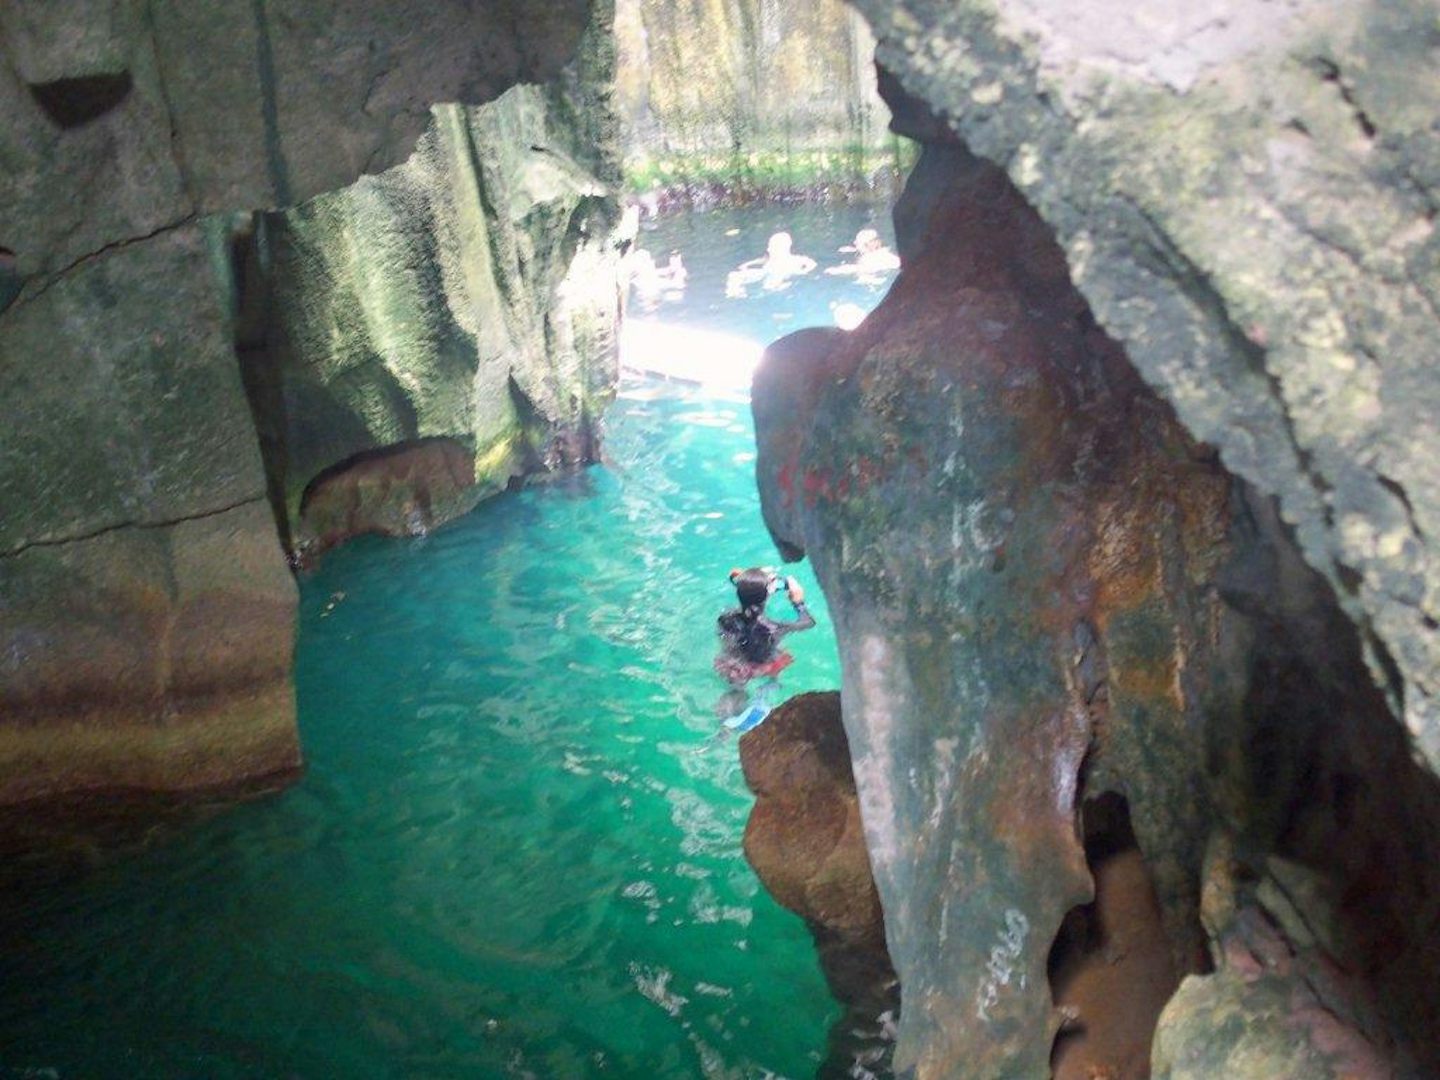 Swimming in the pool in the cave on Sawa-i-lau Island after going ashore form the Fiji Princess